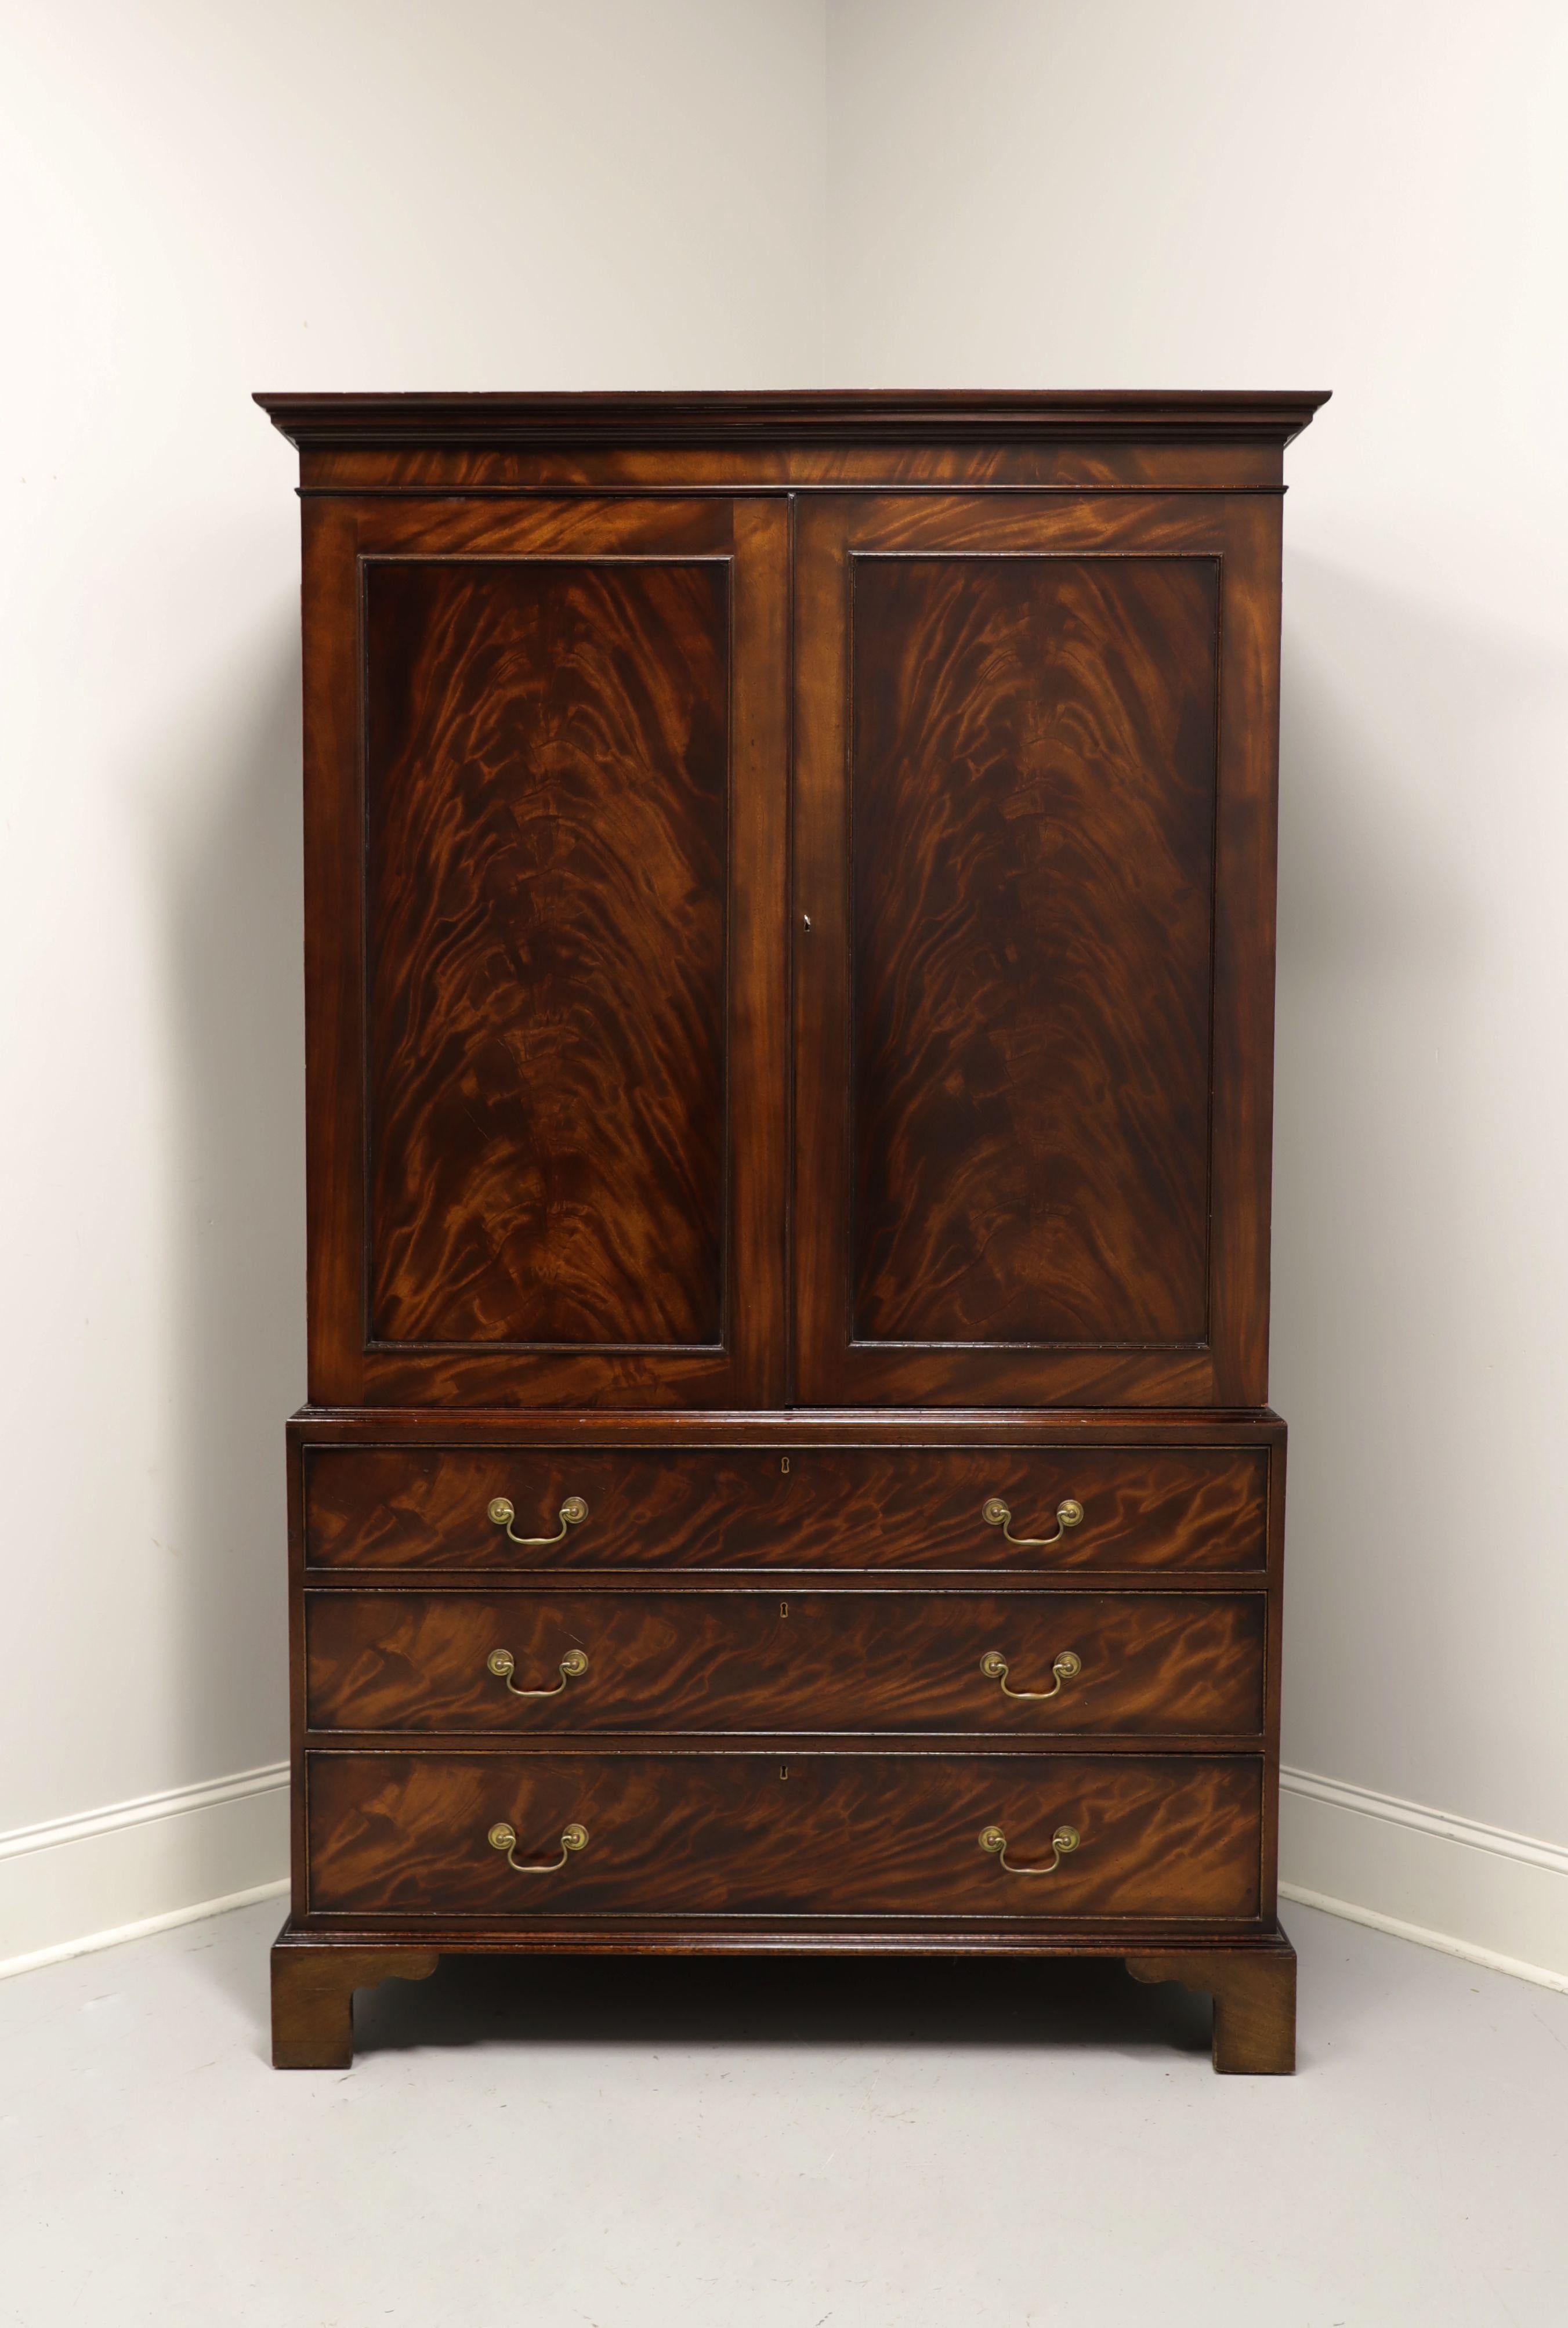 A Chippendale style linen press, unbranded, similar quality to Henredon and Hickory Chair. Flame mahogany with brass hardware, crown moulding at top and bracket feet. Upper area has two lockable solid fold open doors revealing storage with two